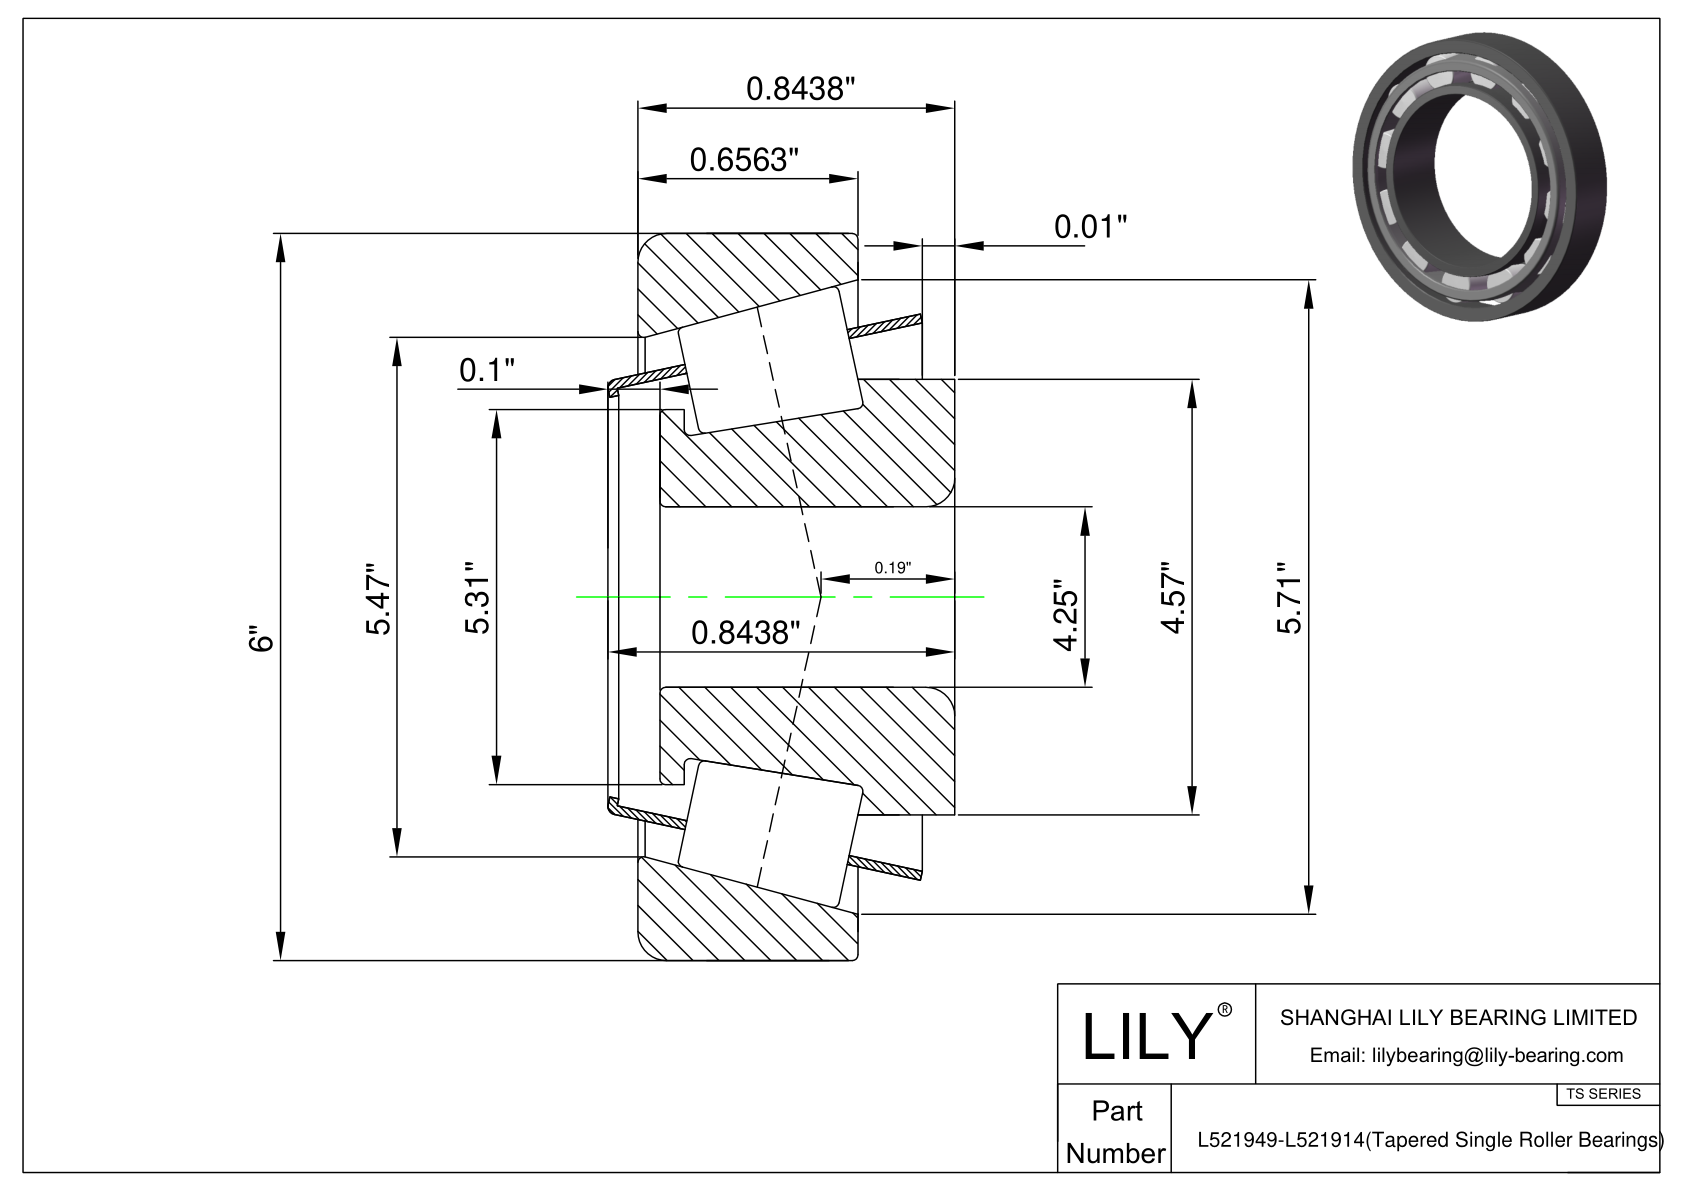 L521949-L521914 TS (Tapered Single Roller Bearings) (Imperial) cad drawing